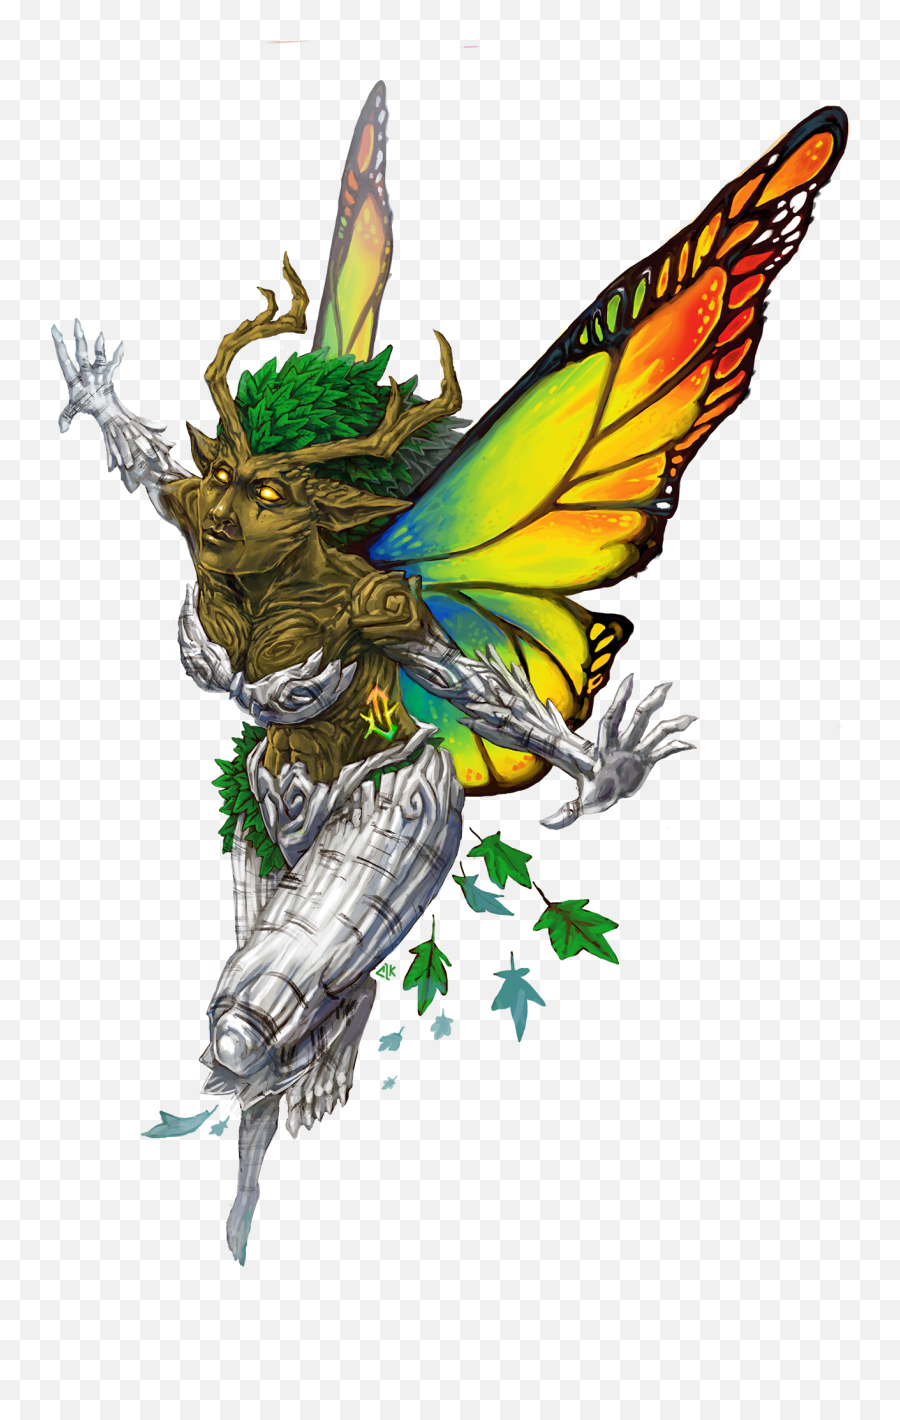 Paizo - Mythical Creature Emoji,Ex Machina Nathan She Is Capable Of Emotion Quote